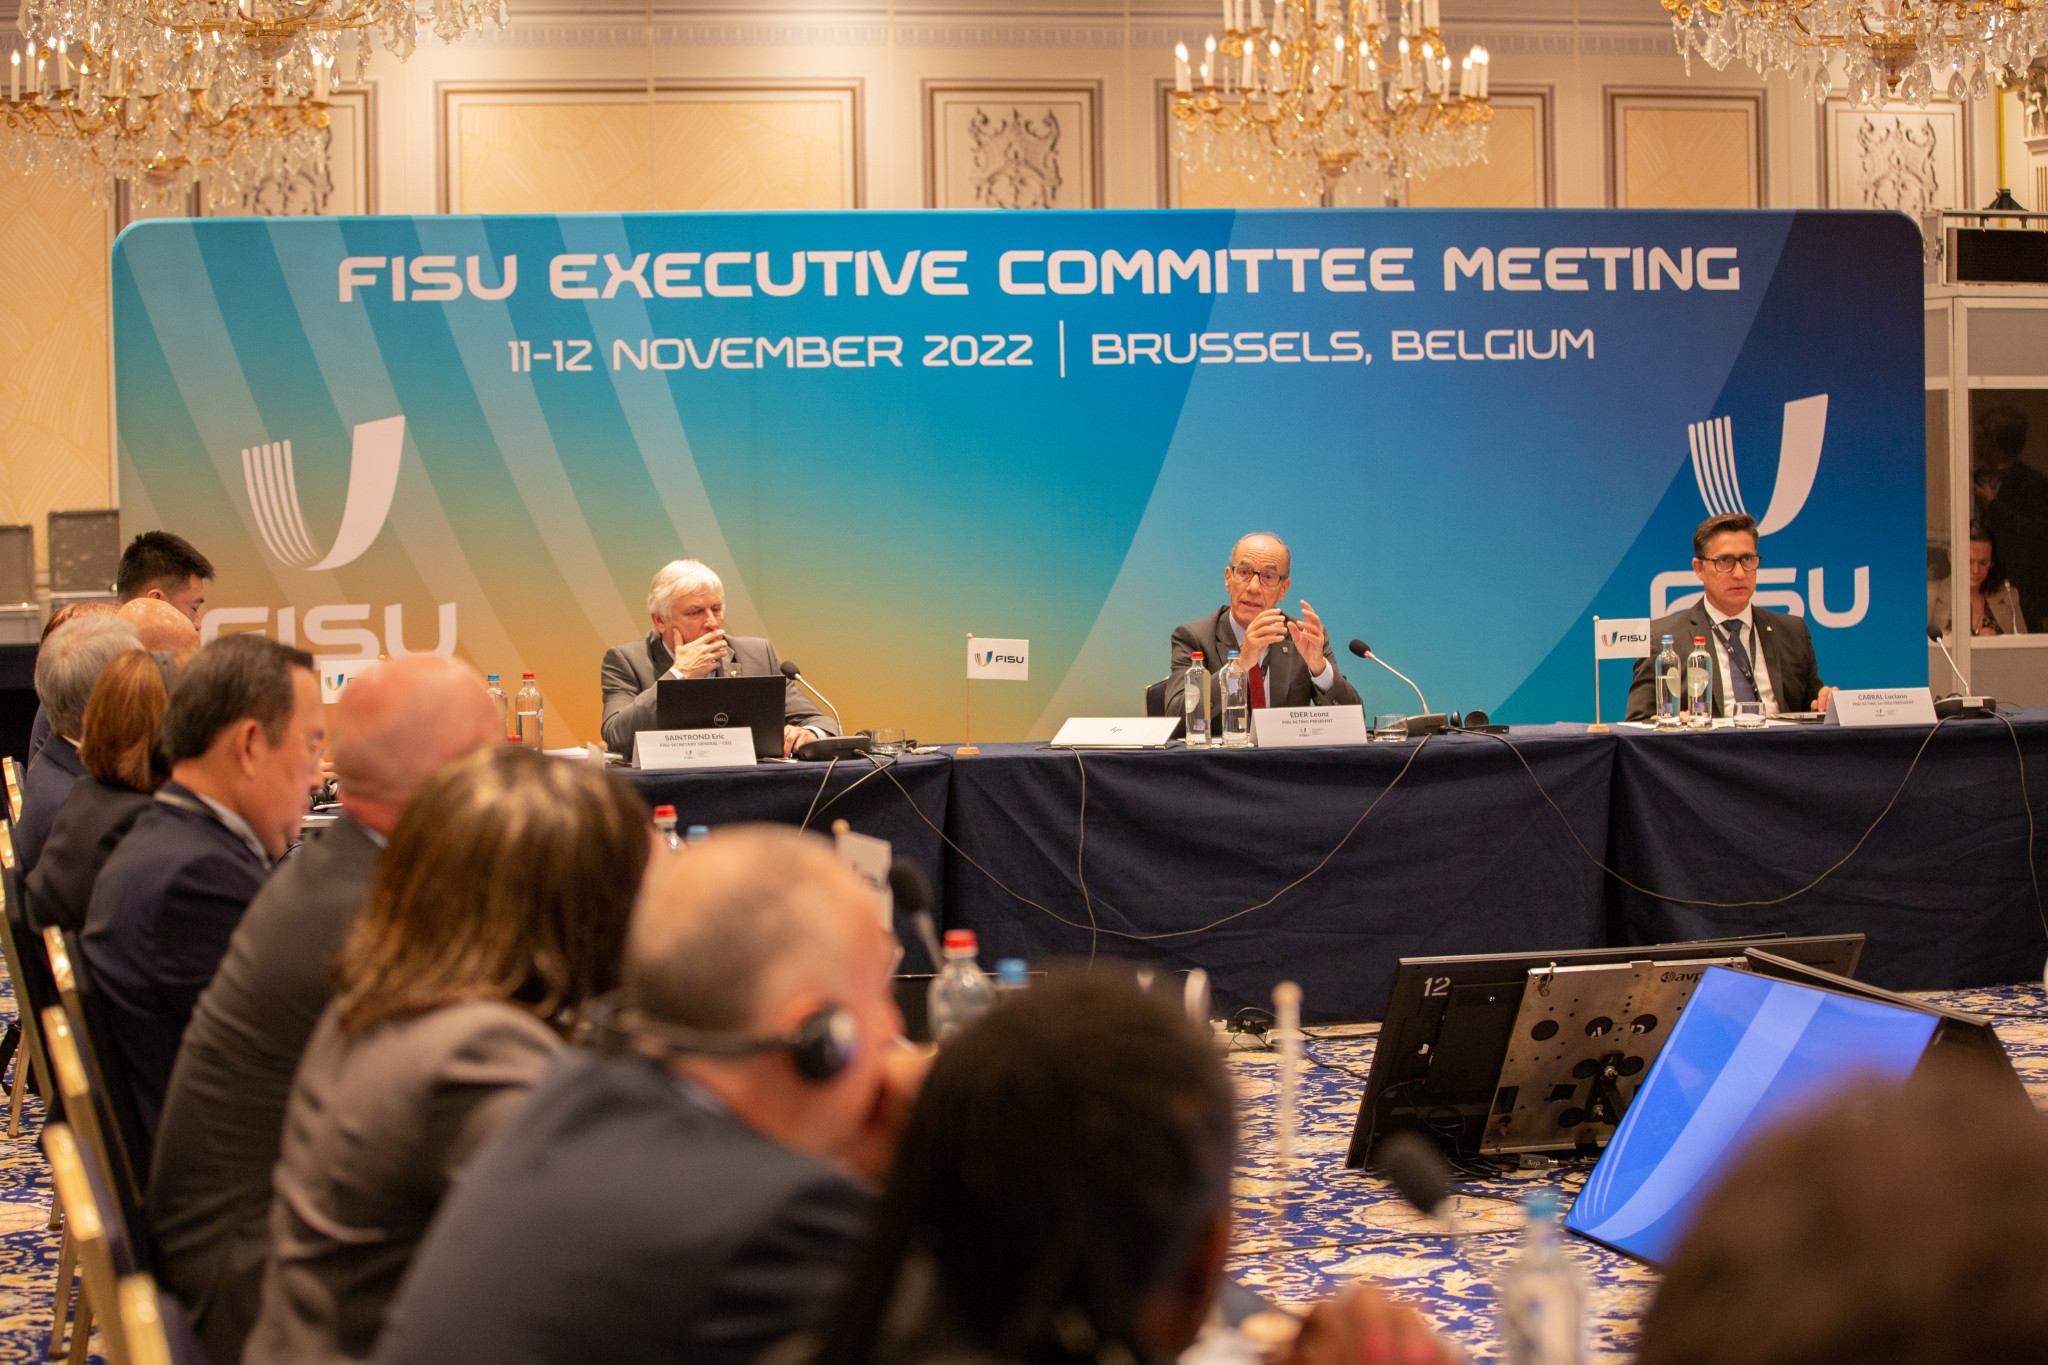 FISU's Executive Committee has met in Brussels, where the attribution of the 2027 World University Games to Chungcheong was the main item on the agenda ©FISU